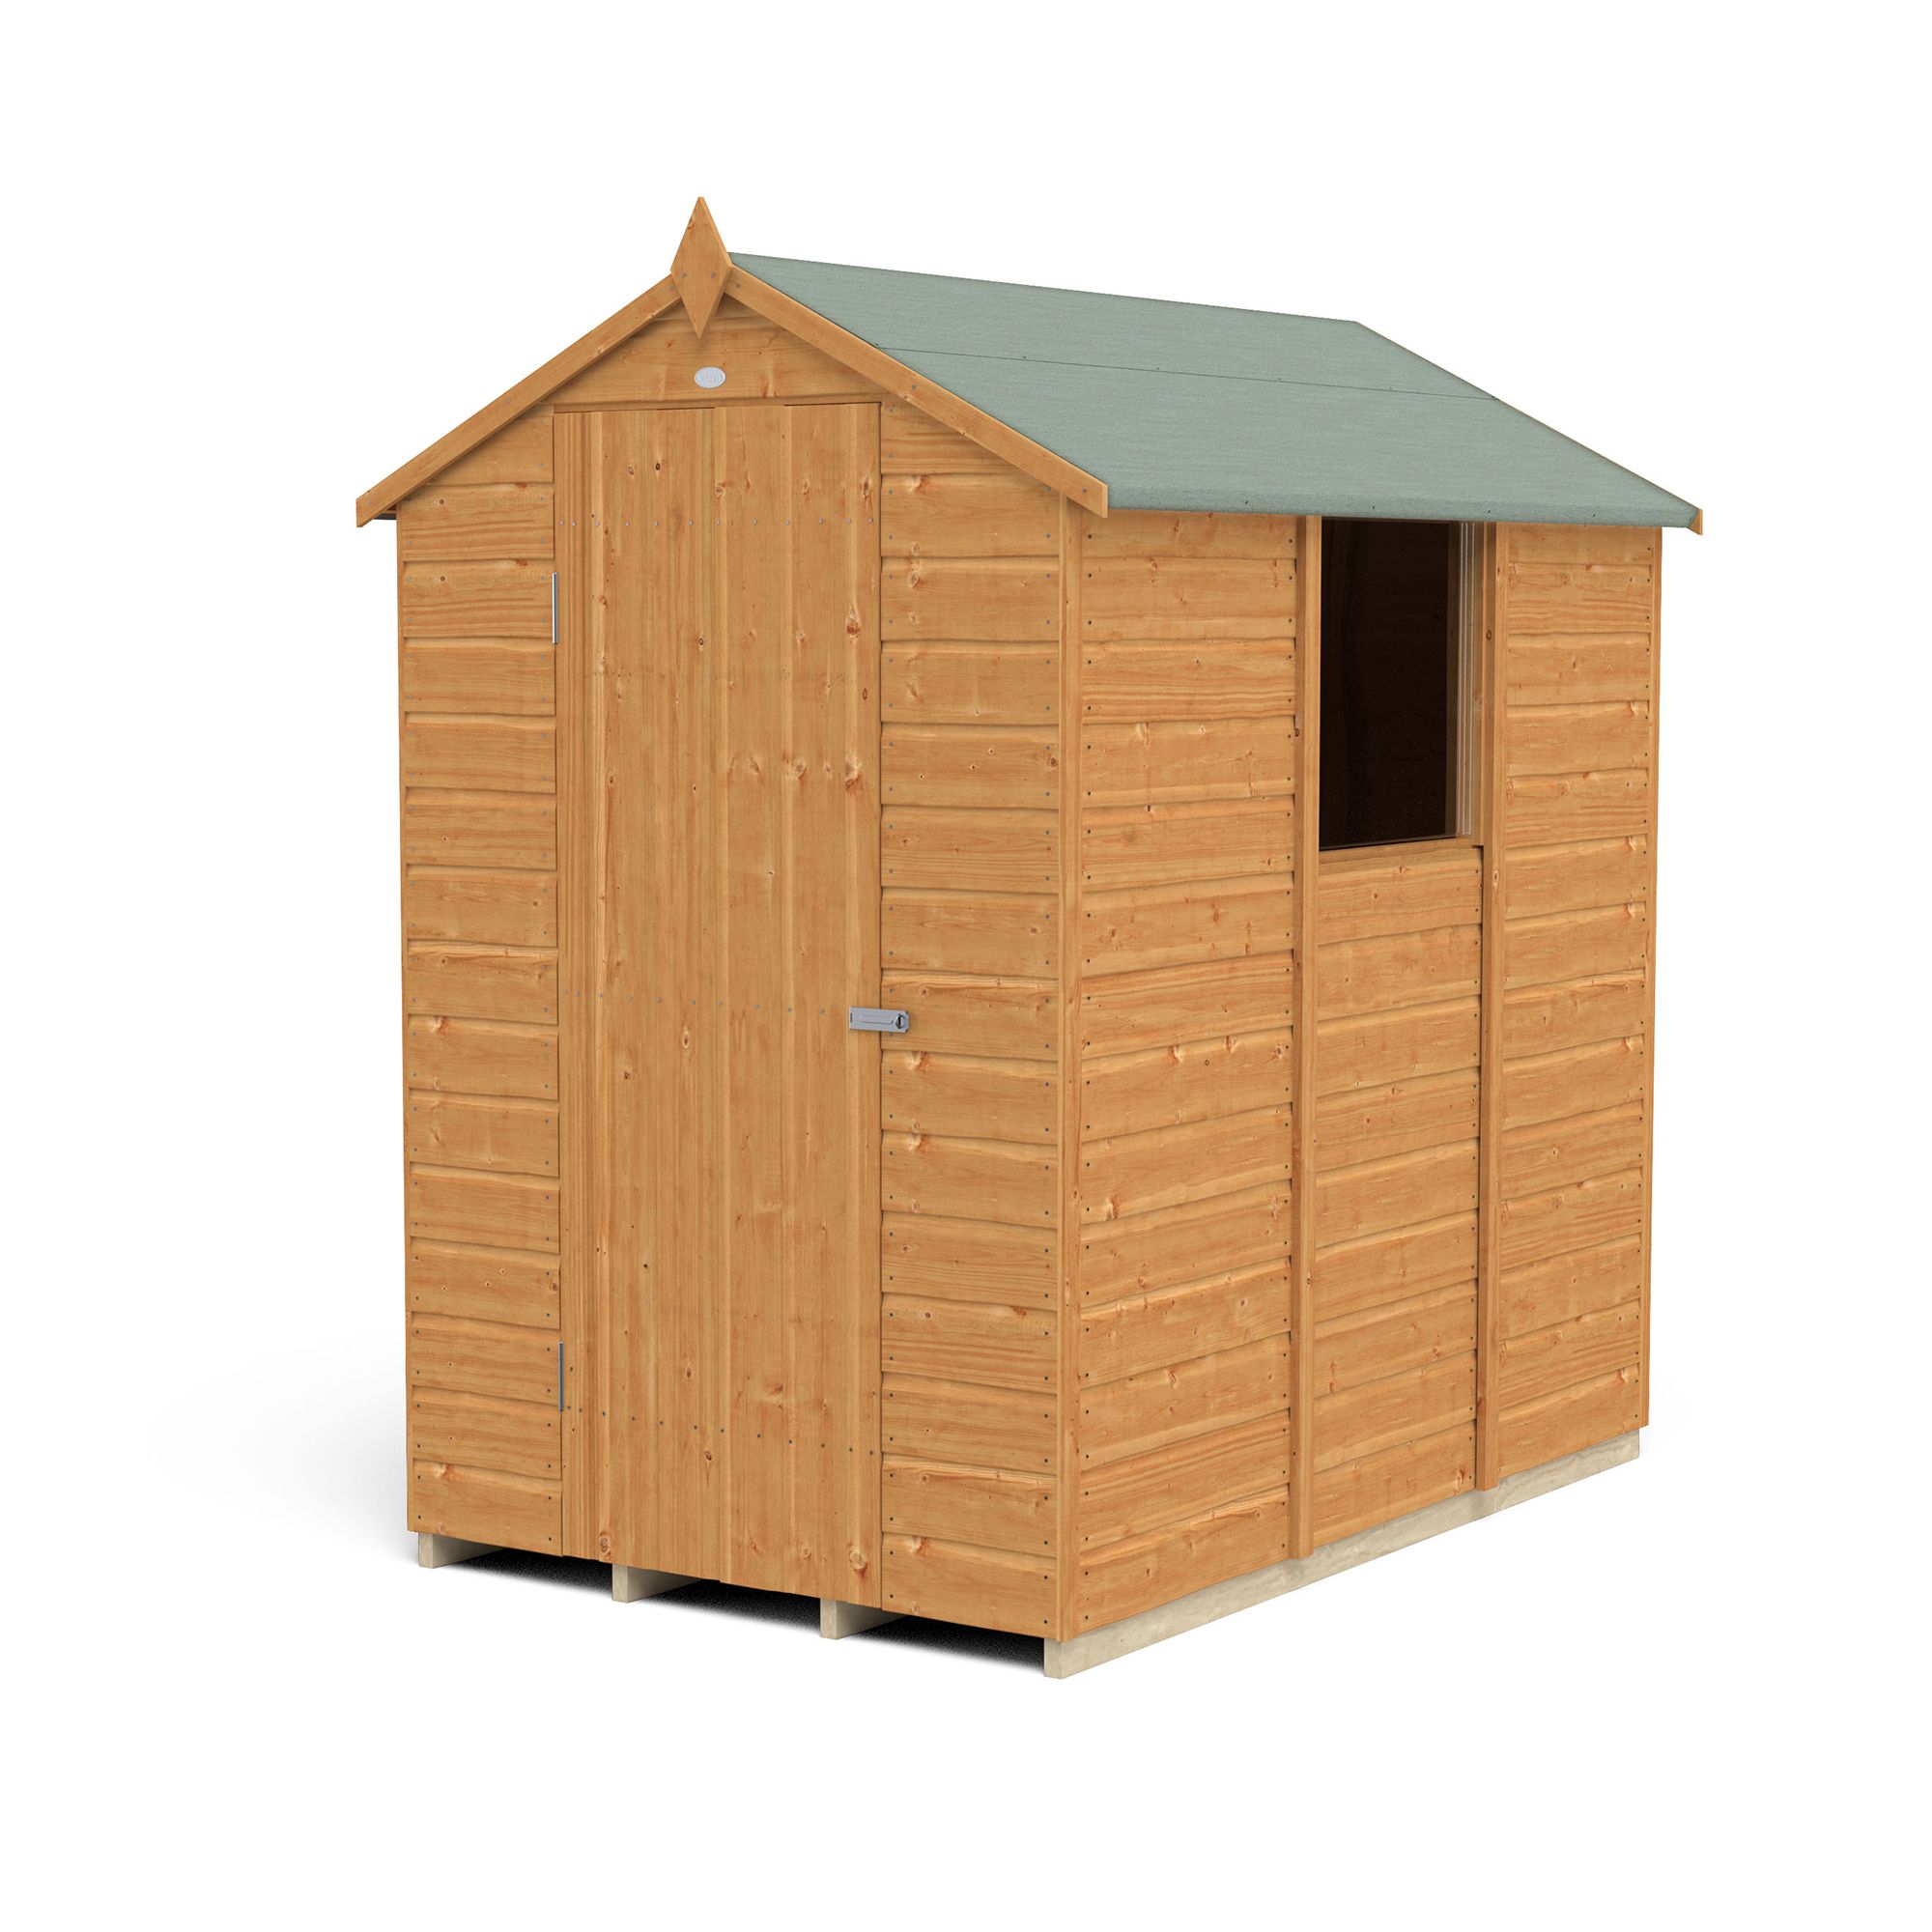 Forest Garden Shiplap 6x4 ft Apex Wooden Dip treated Shed with floor & 1 window (Base included) - Assembly service included